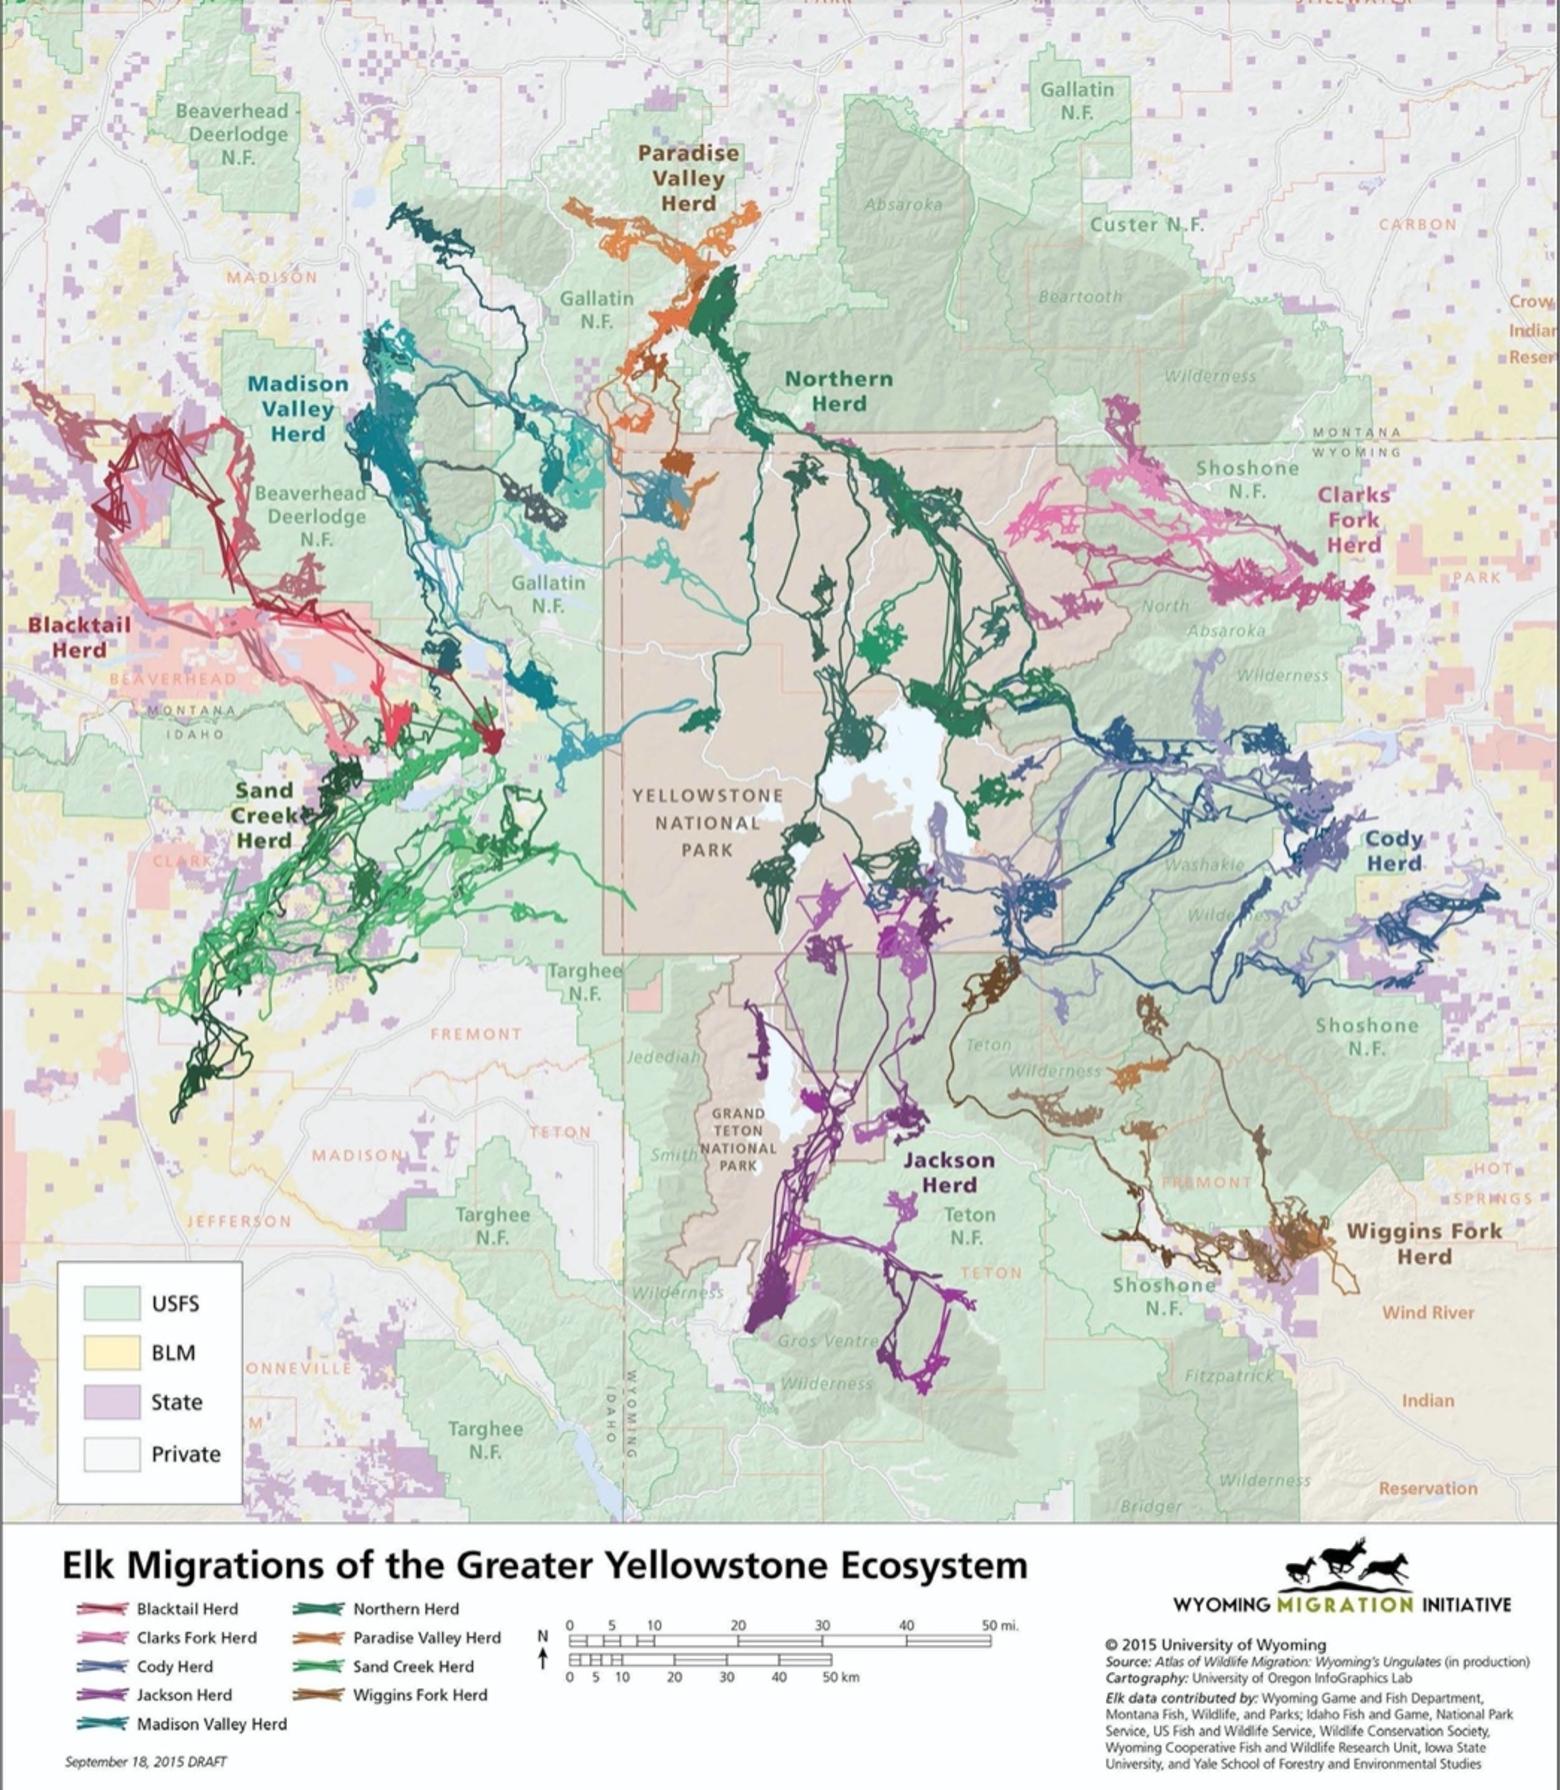 Greater Yellowstone is renowned for its wildlife in part because the diversity of animal populations still present here have vanished from most other areas of the Lower 48 states.  A question for outdoor-minded members of Generations Z through X is this: how can ancient wildlife migrations, like those for elk pictured in this map, persist with unprecedented expansion of  the human development footprint happening along with rapidly rising levels of outdoor recreation in the public land backcountry? 